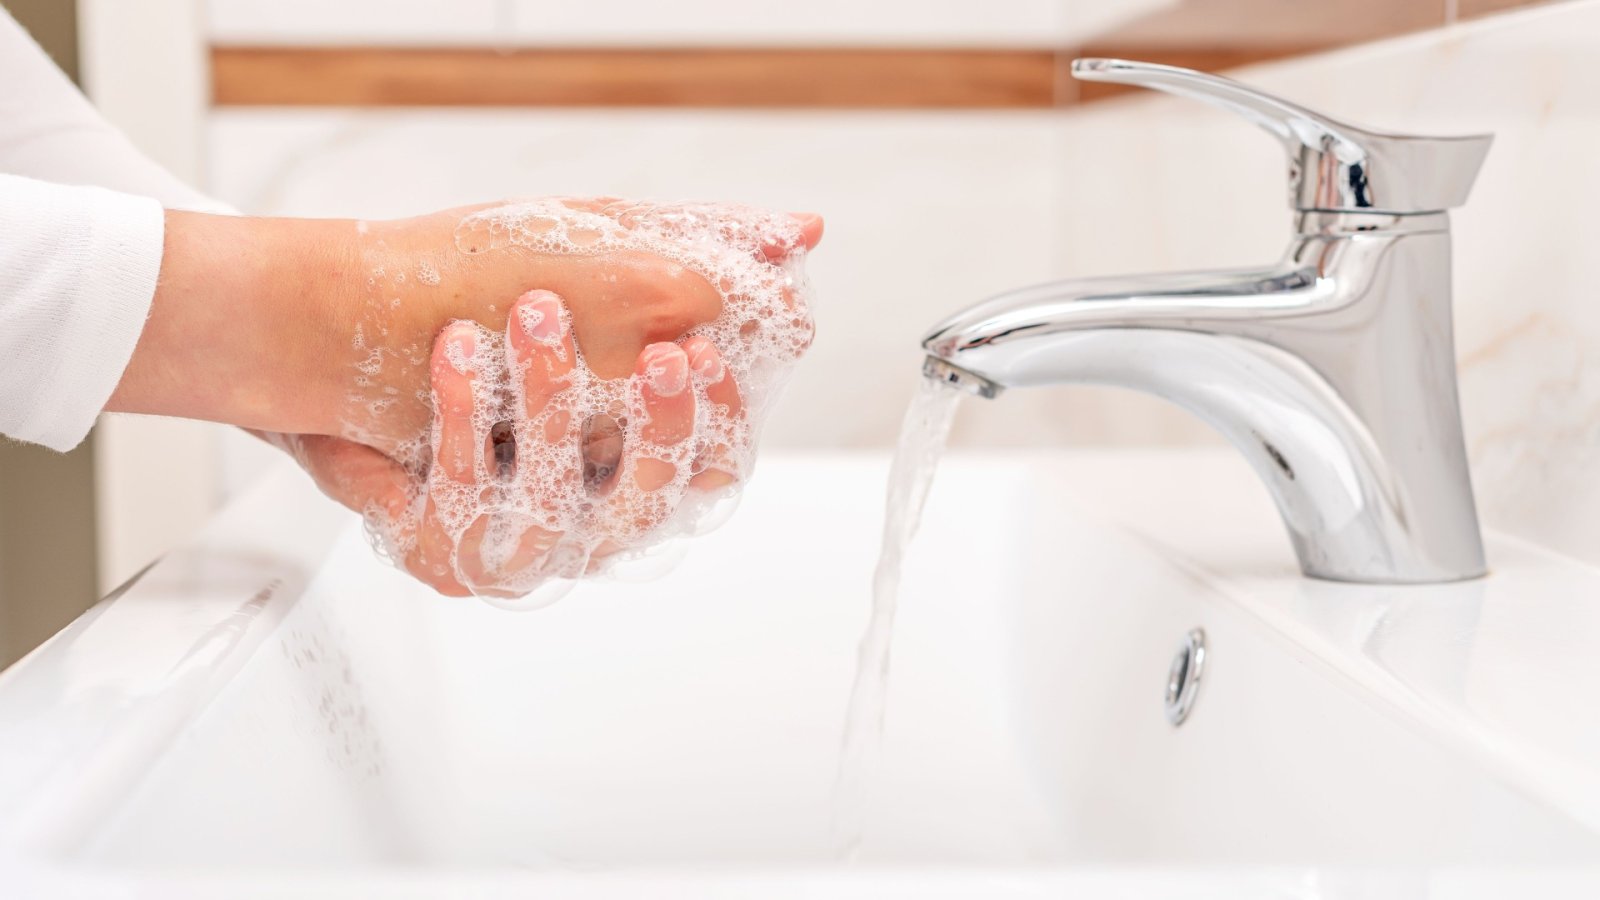 Why you should wash your hands before sex